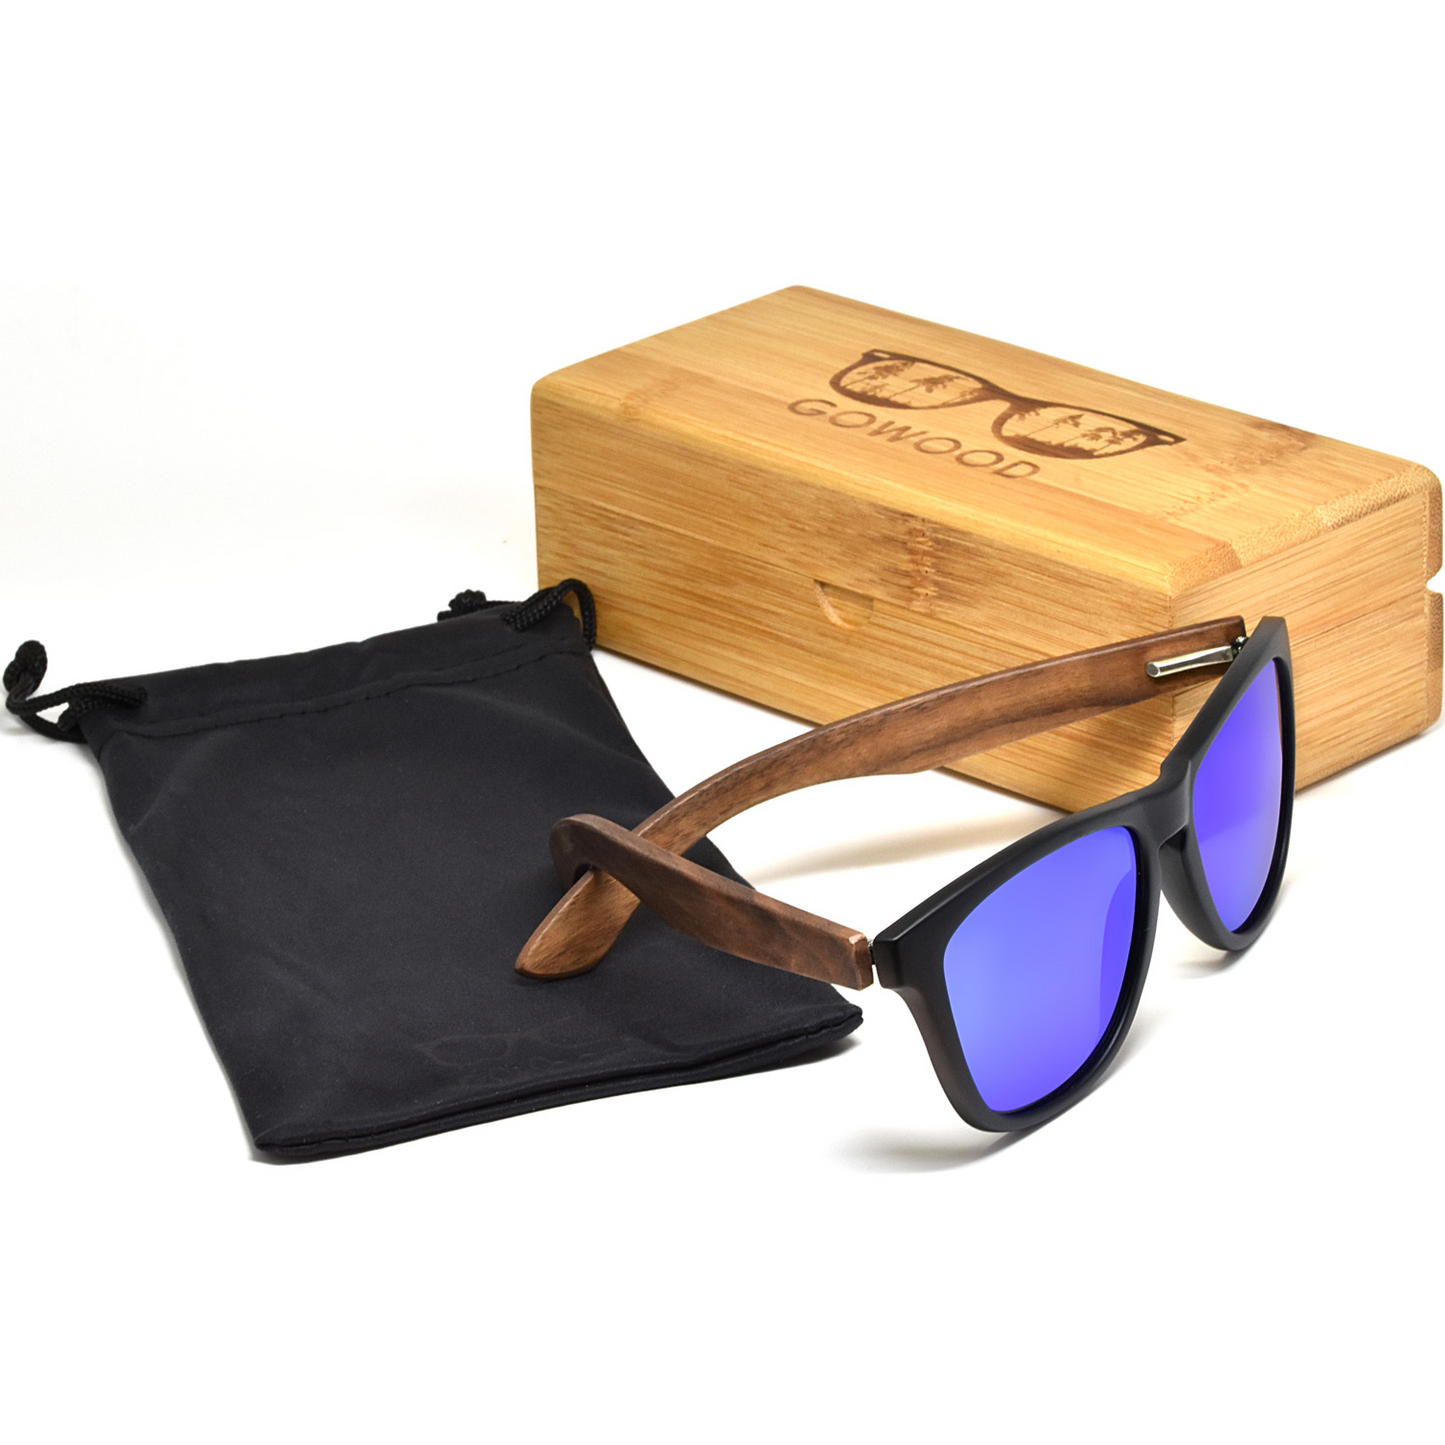 Classic walnut wood sunglasses with blue mirrored polarized lenses